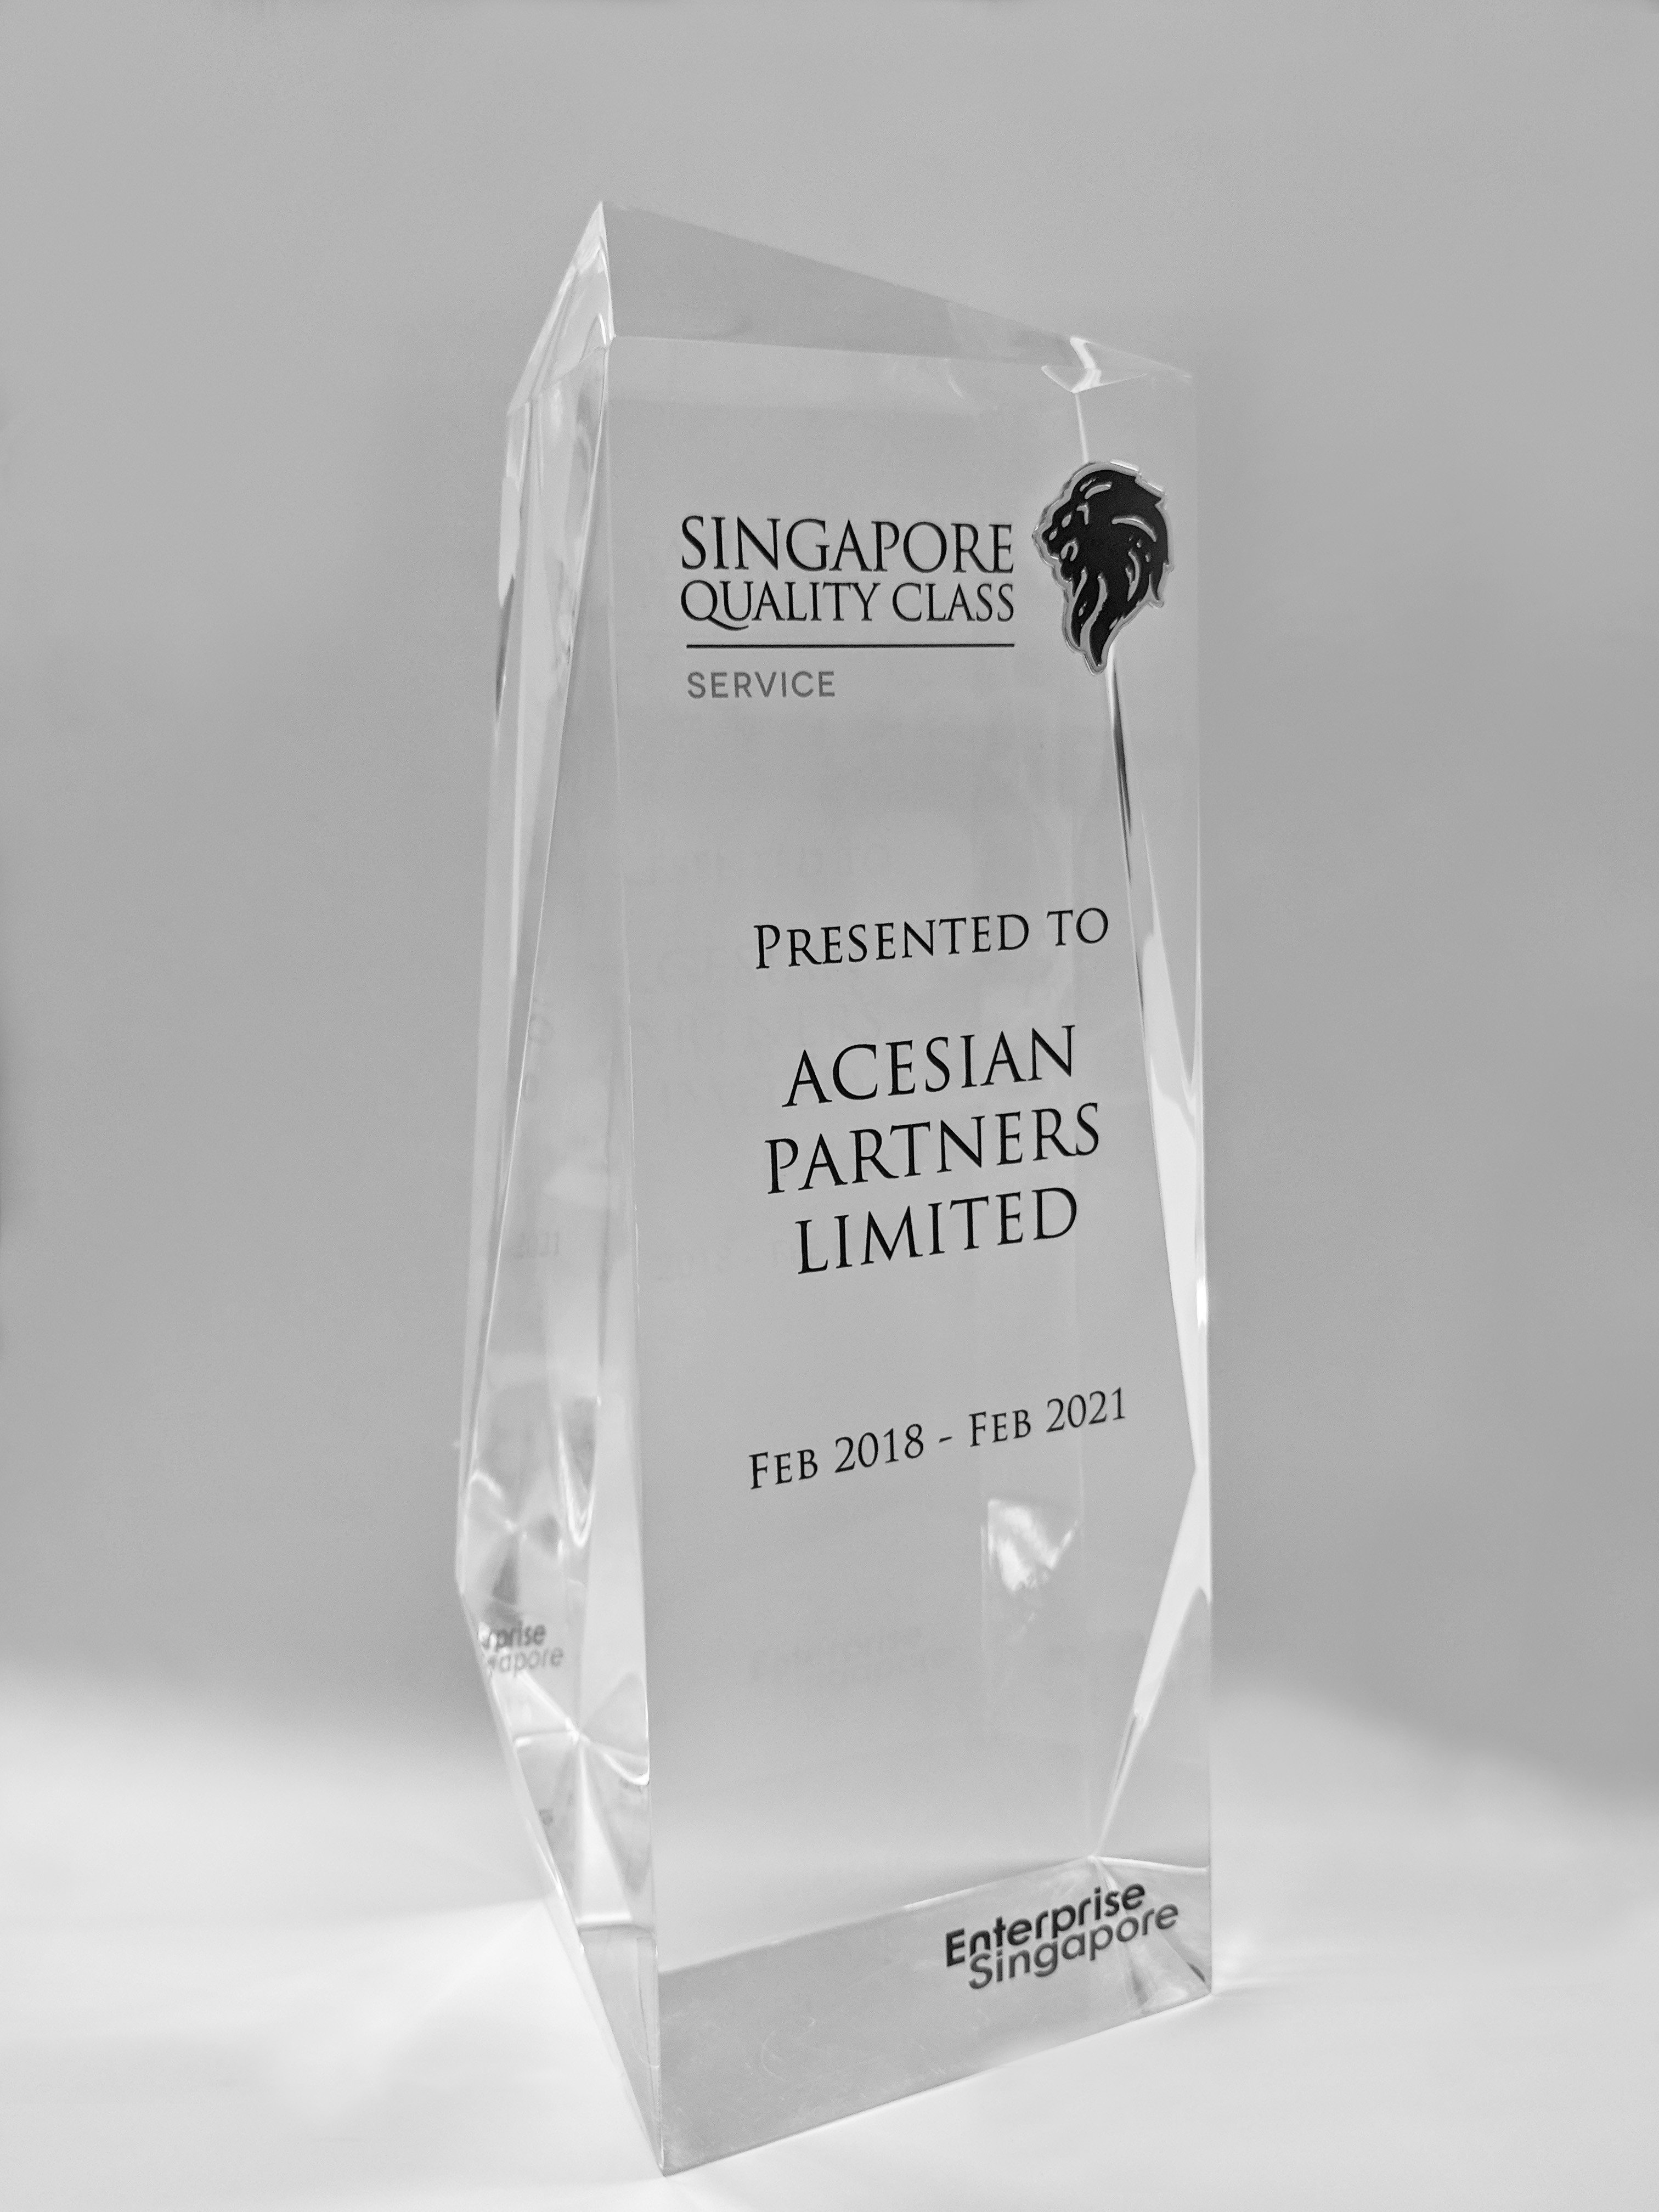 Acesian Partners has been awarded the Singapore Quality Class for service excellence.